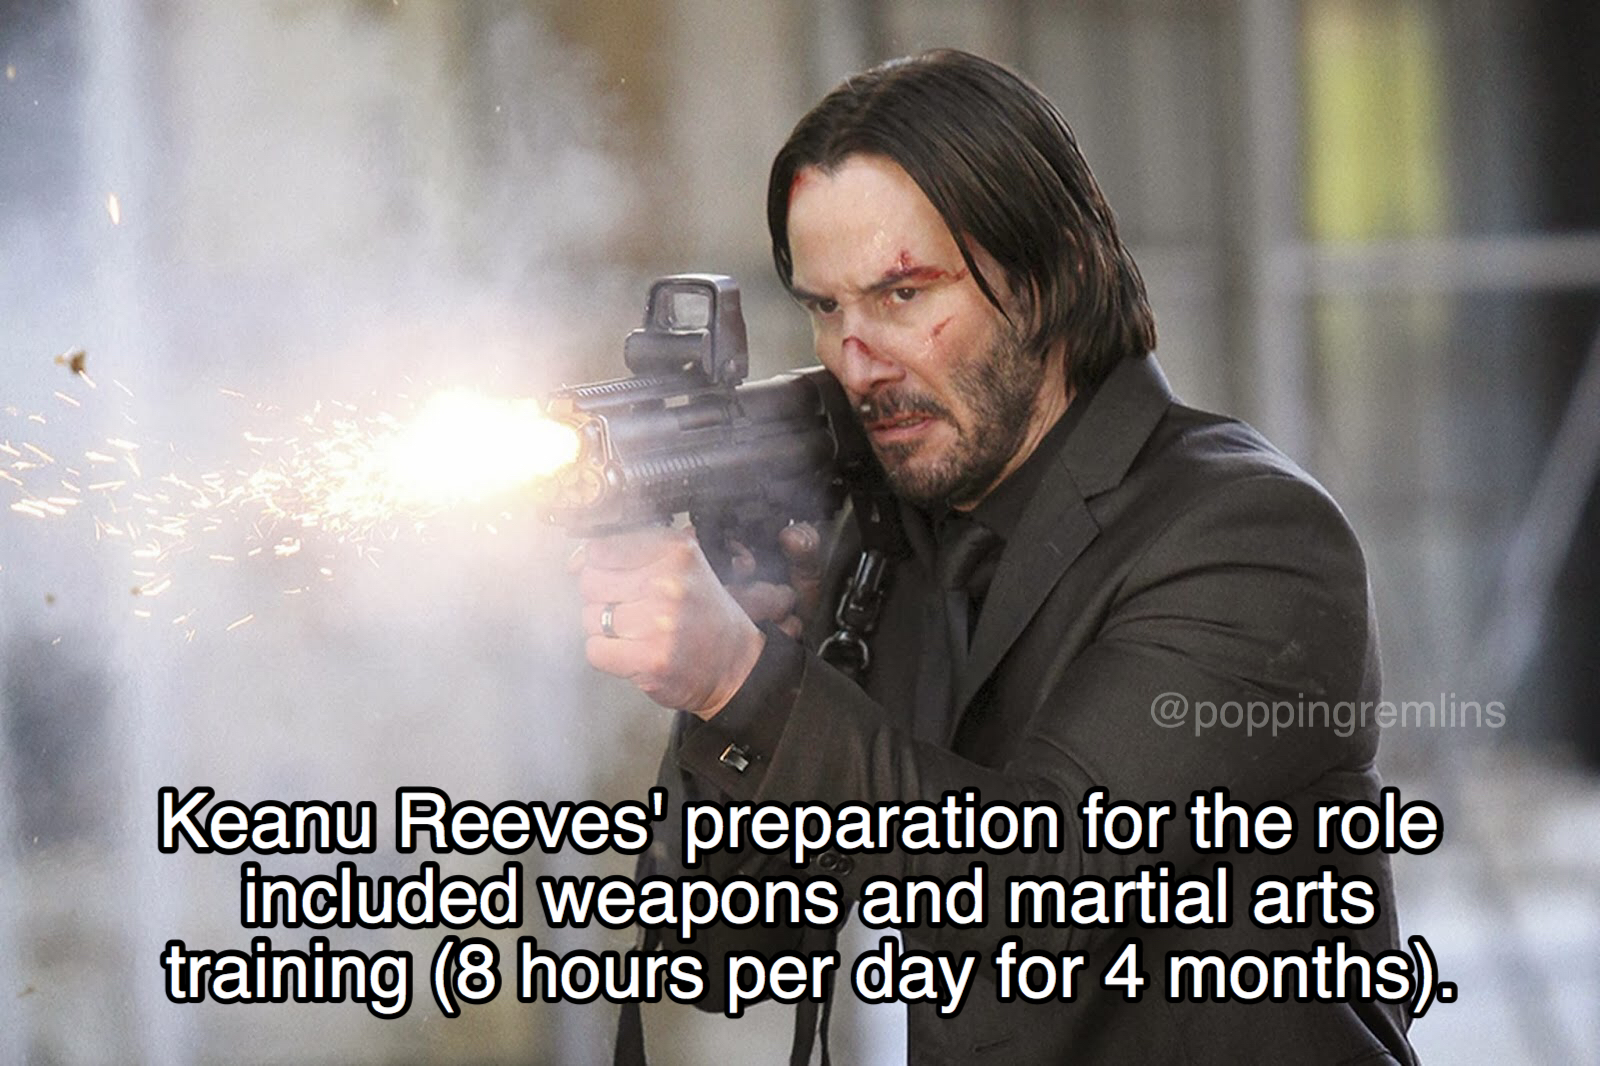 john wick facts - Keanu Reeves' preparation for the role included weapons and martial arts training 8 hours per day for 4 months.